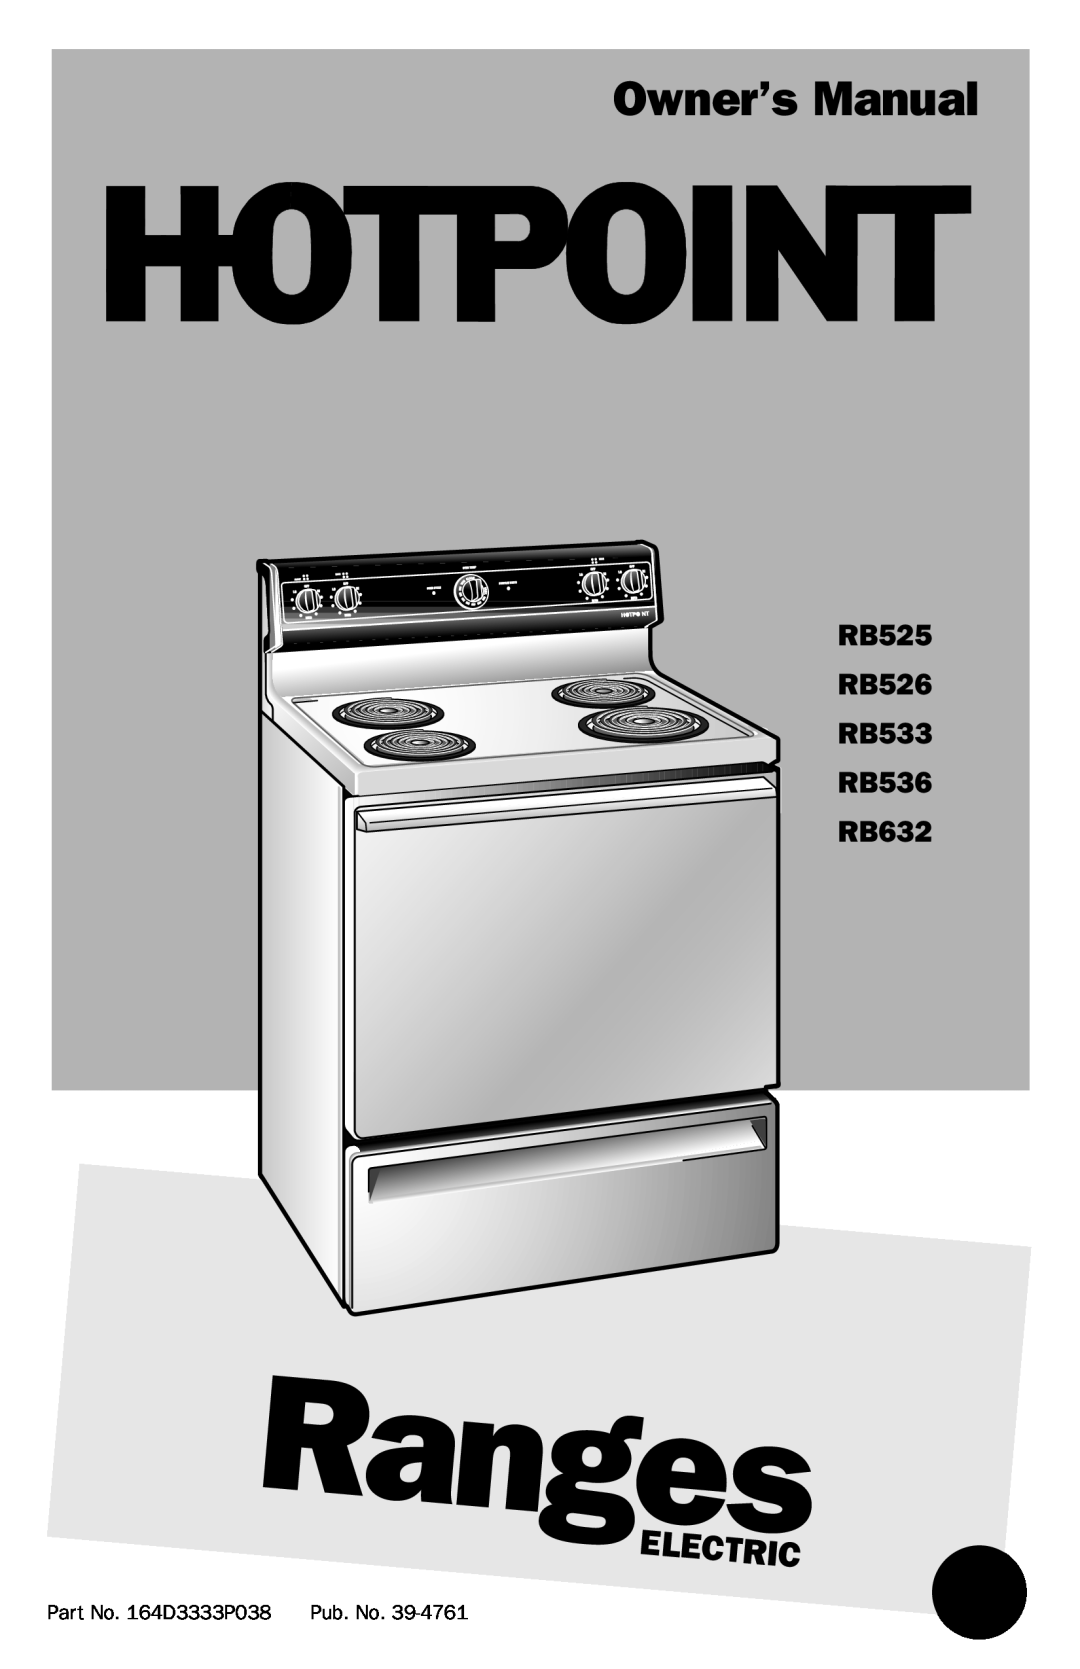 Hotpoint owner manual RB525 RB526 RB533 RB536 RB632, Ranges, Electric, Part No. 164D3333P038 Pub. No 